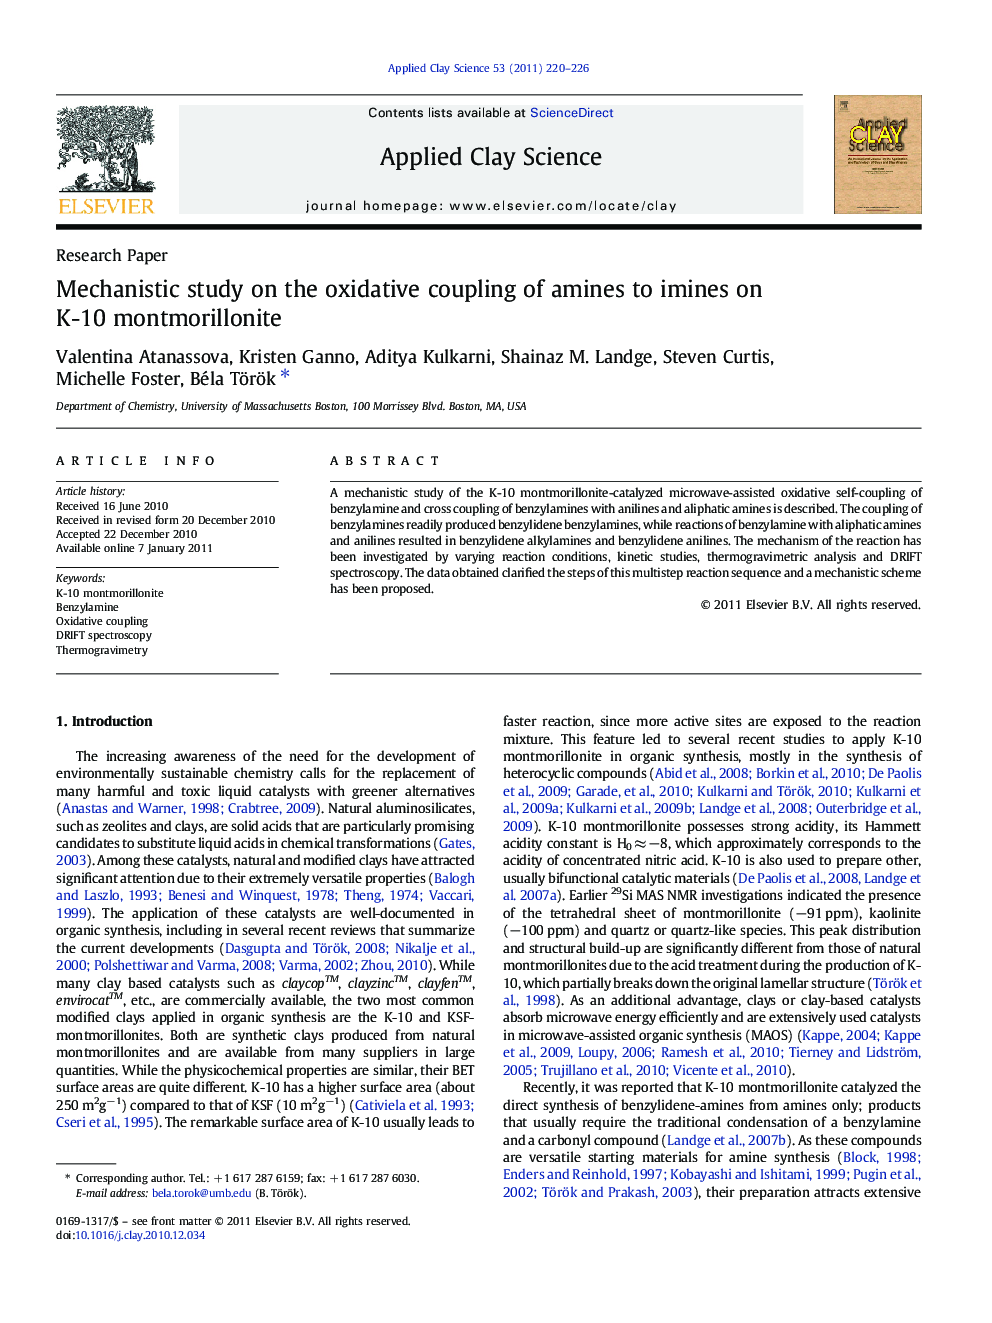 Mechanistic study on the oxidative coupling of amines to imines on K-10 montmorillonite